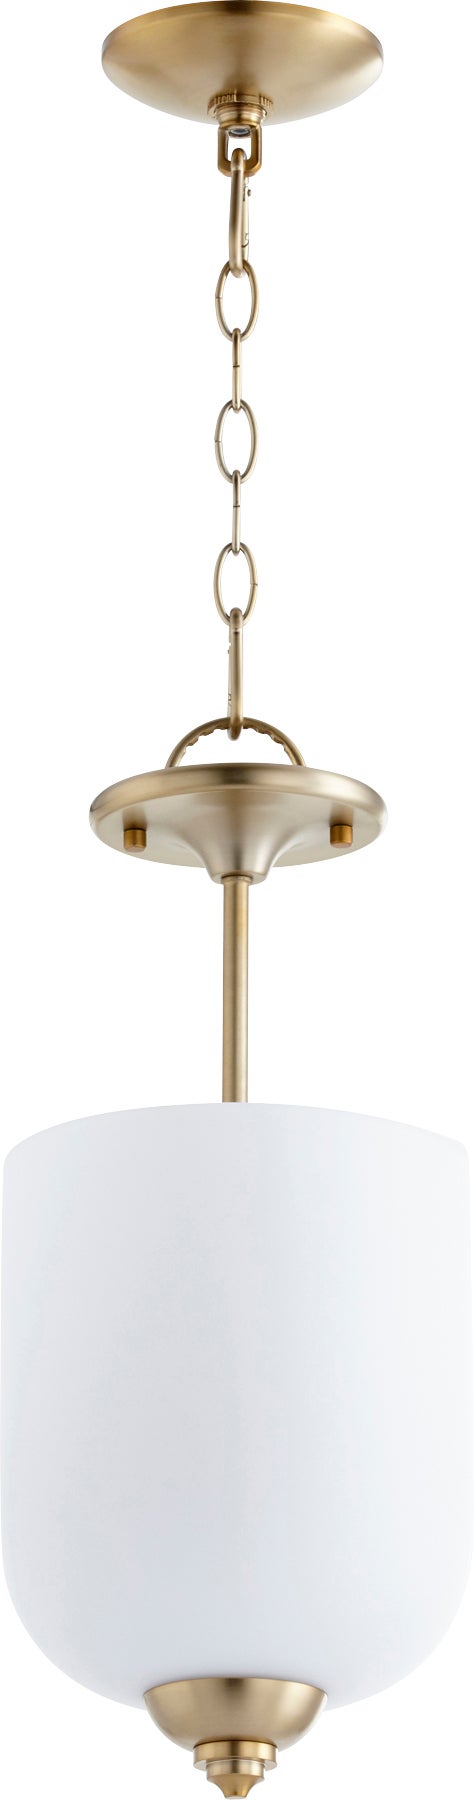 Antique Finish Quorum 6911-3-180 Transitional Three Light Island Pendant from Richmond Collection in Brass 38.00 inches 18.00x38.00x8.00 